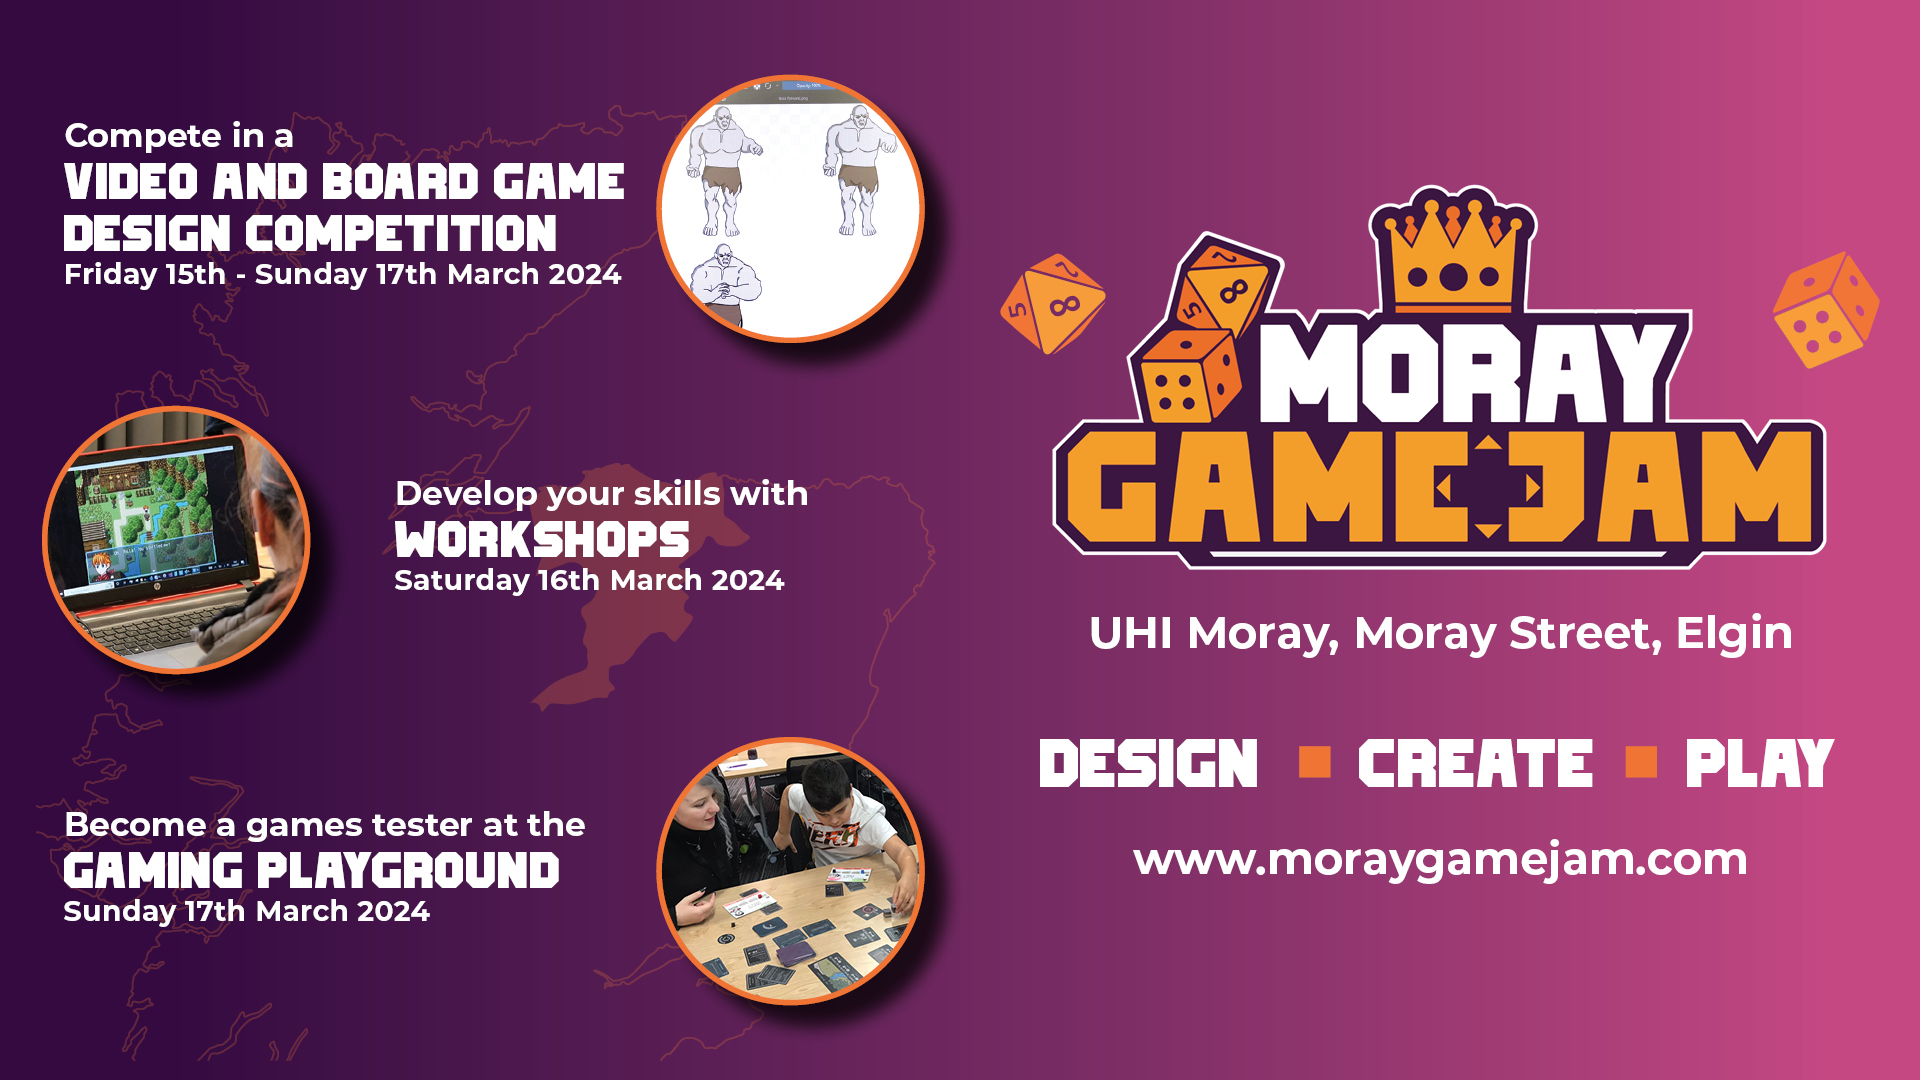 Moray Game Jam returns for a 7th Year